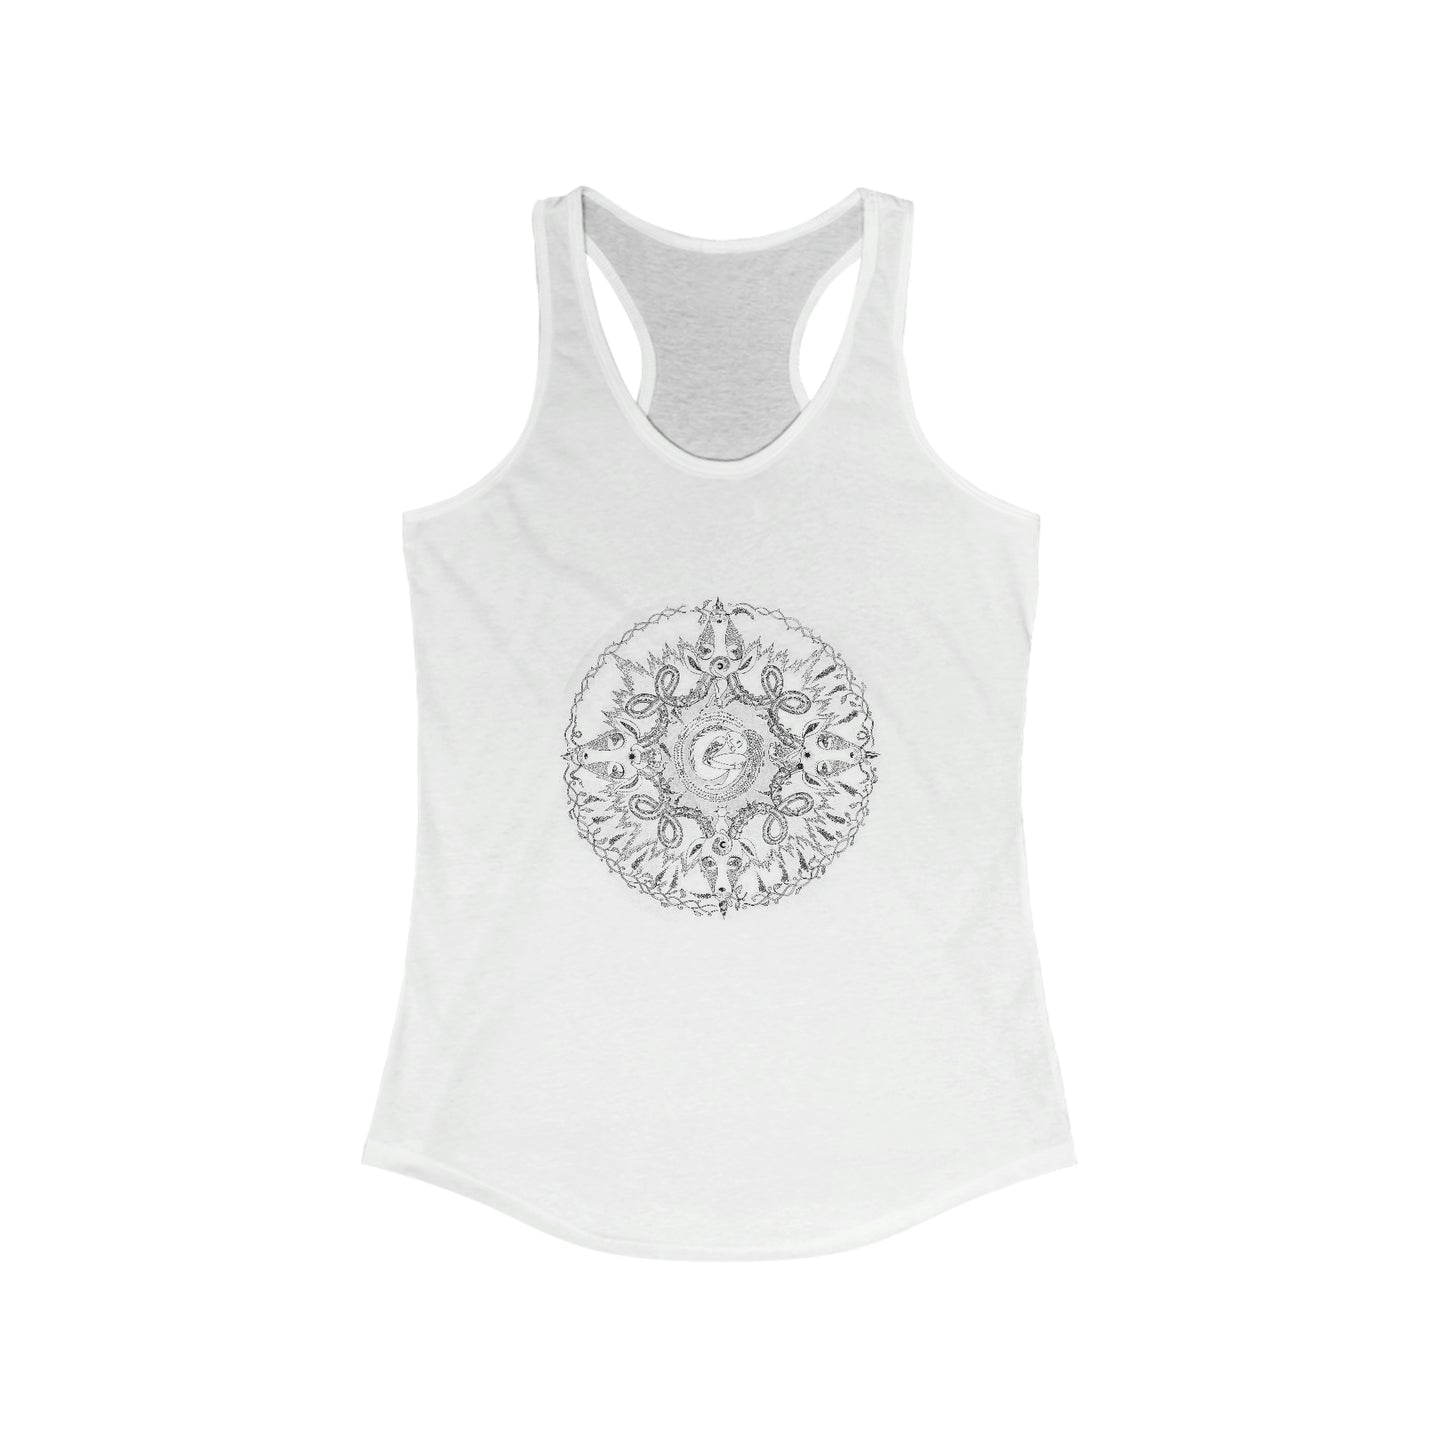 Chinese Zodiac Sign Tank Top (Goat) Limited Edition